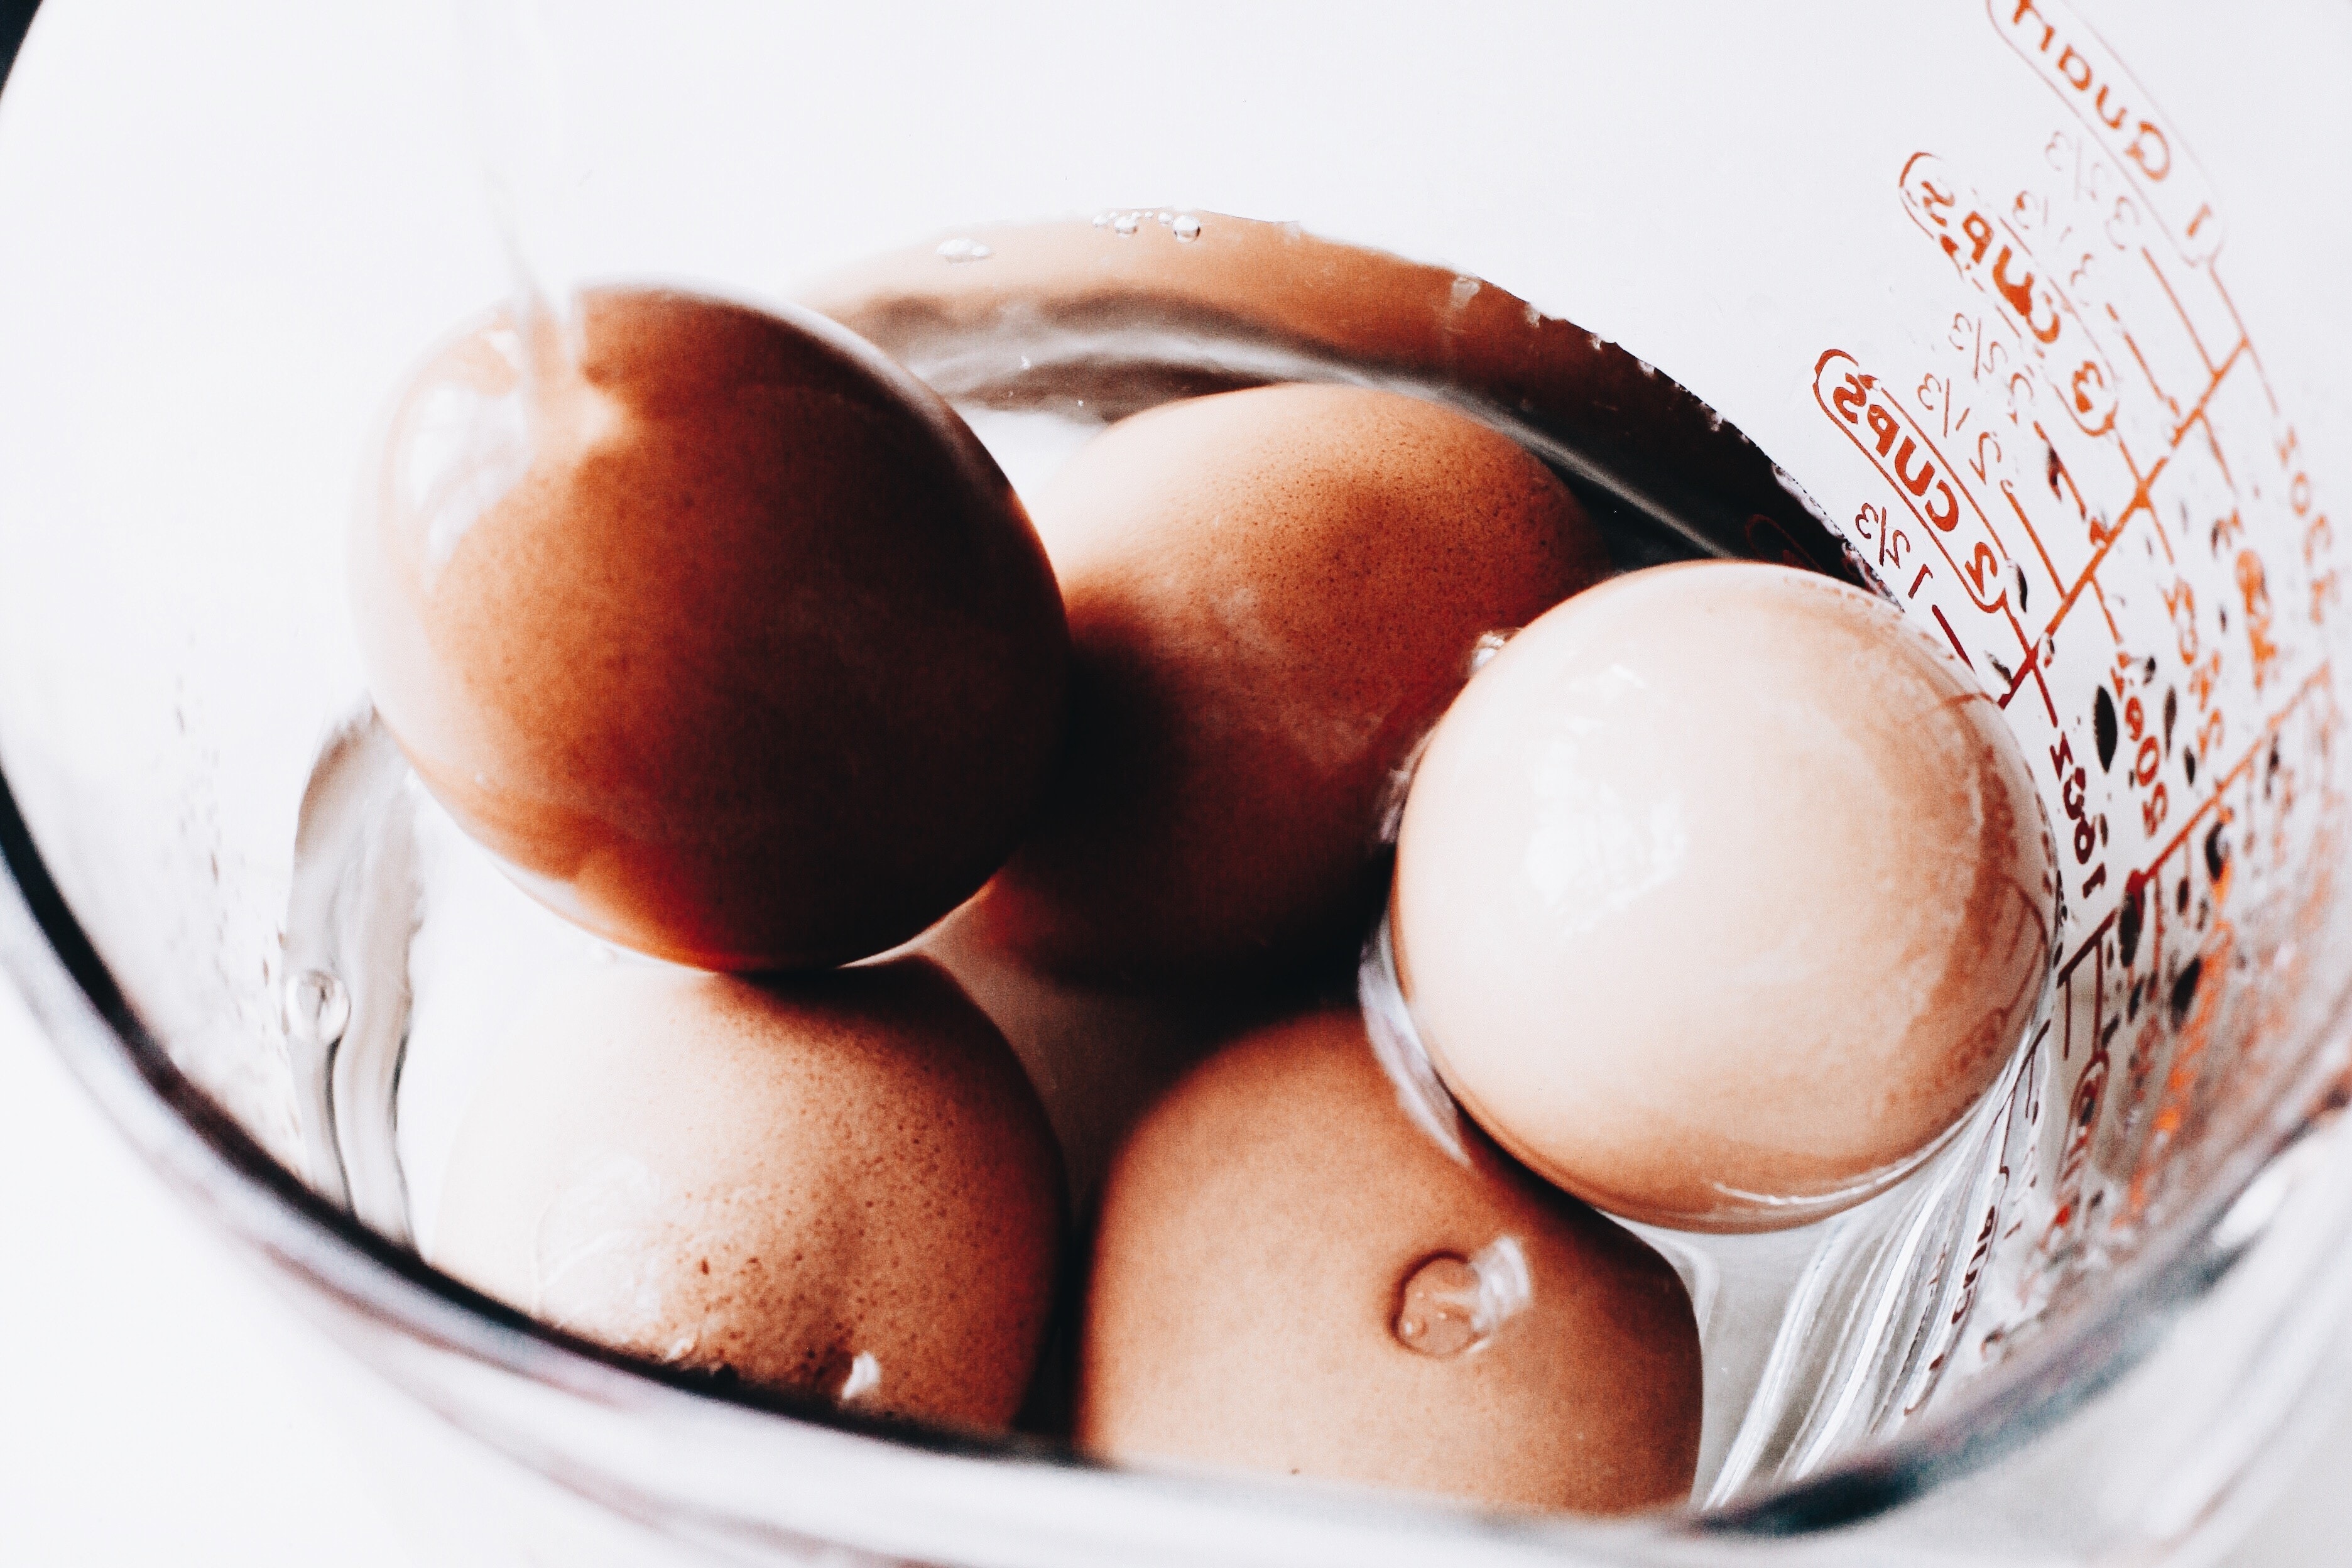 How To Bring Eggs To Room Temperature Quickly